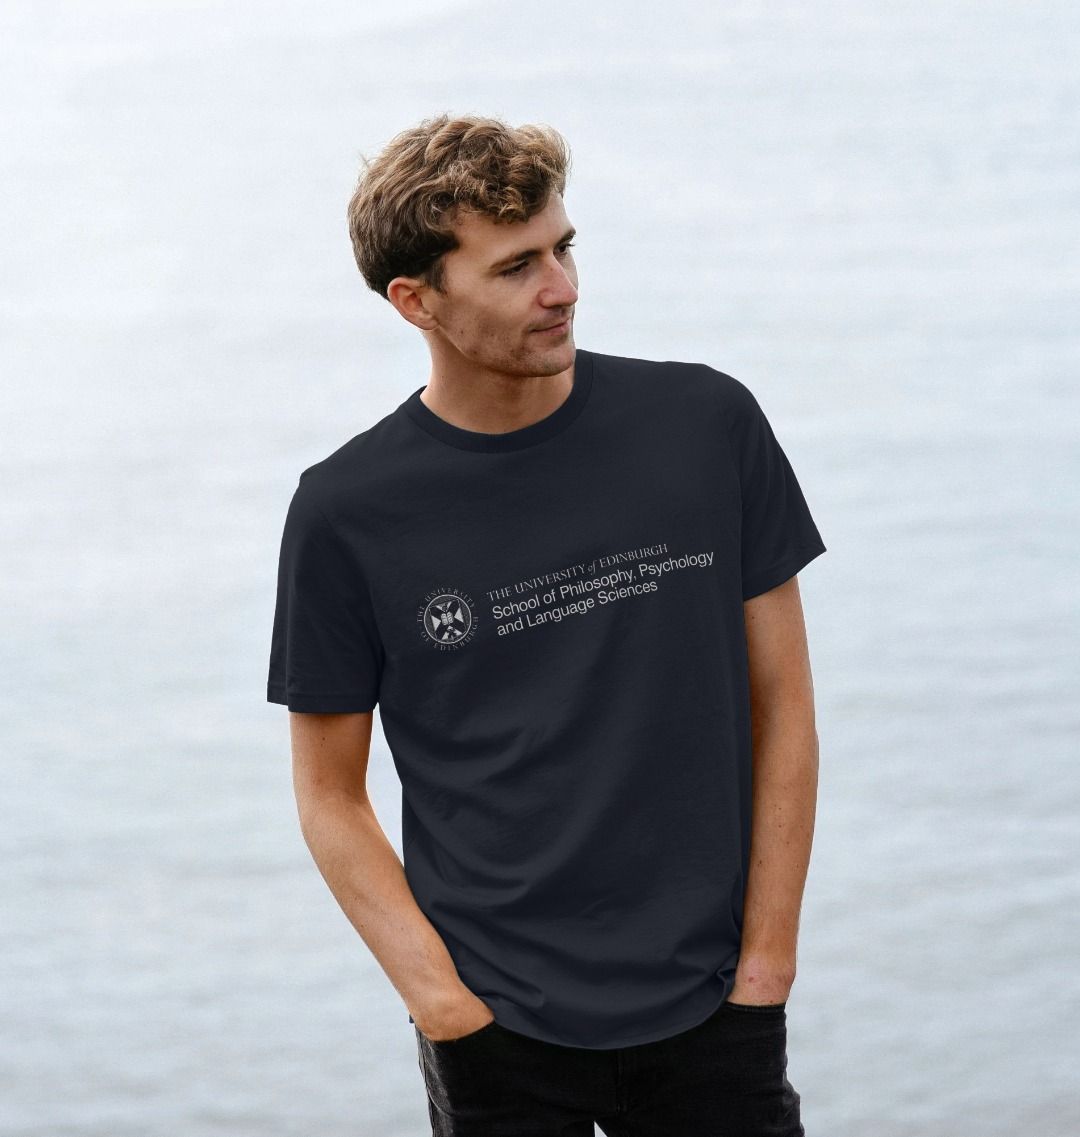 A model wearing our School of Philosophy, Psychology and Language Sciences T Shirt 